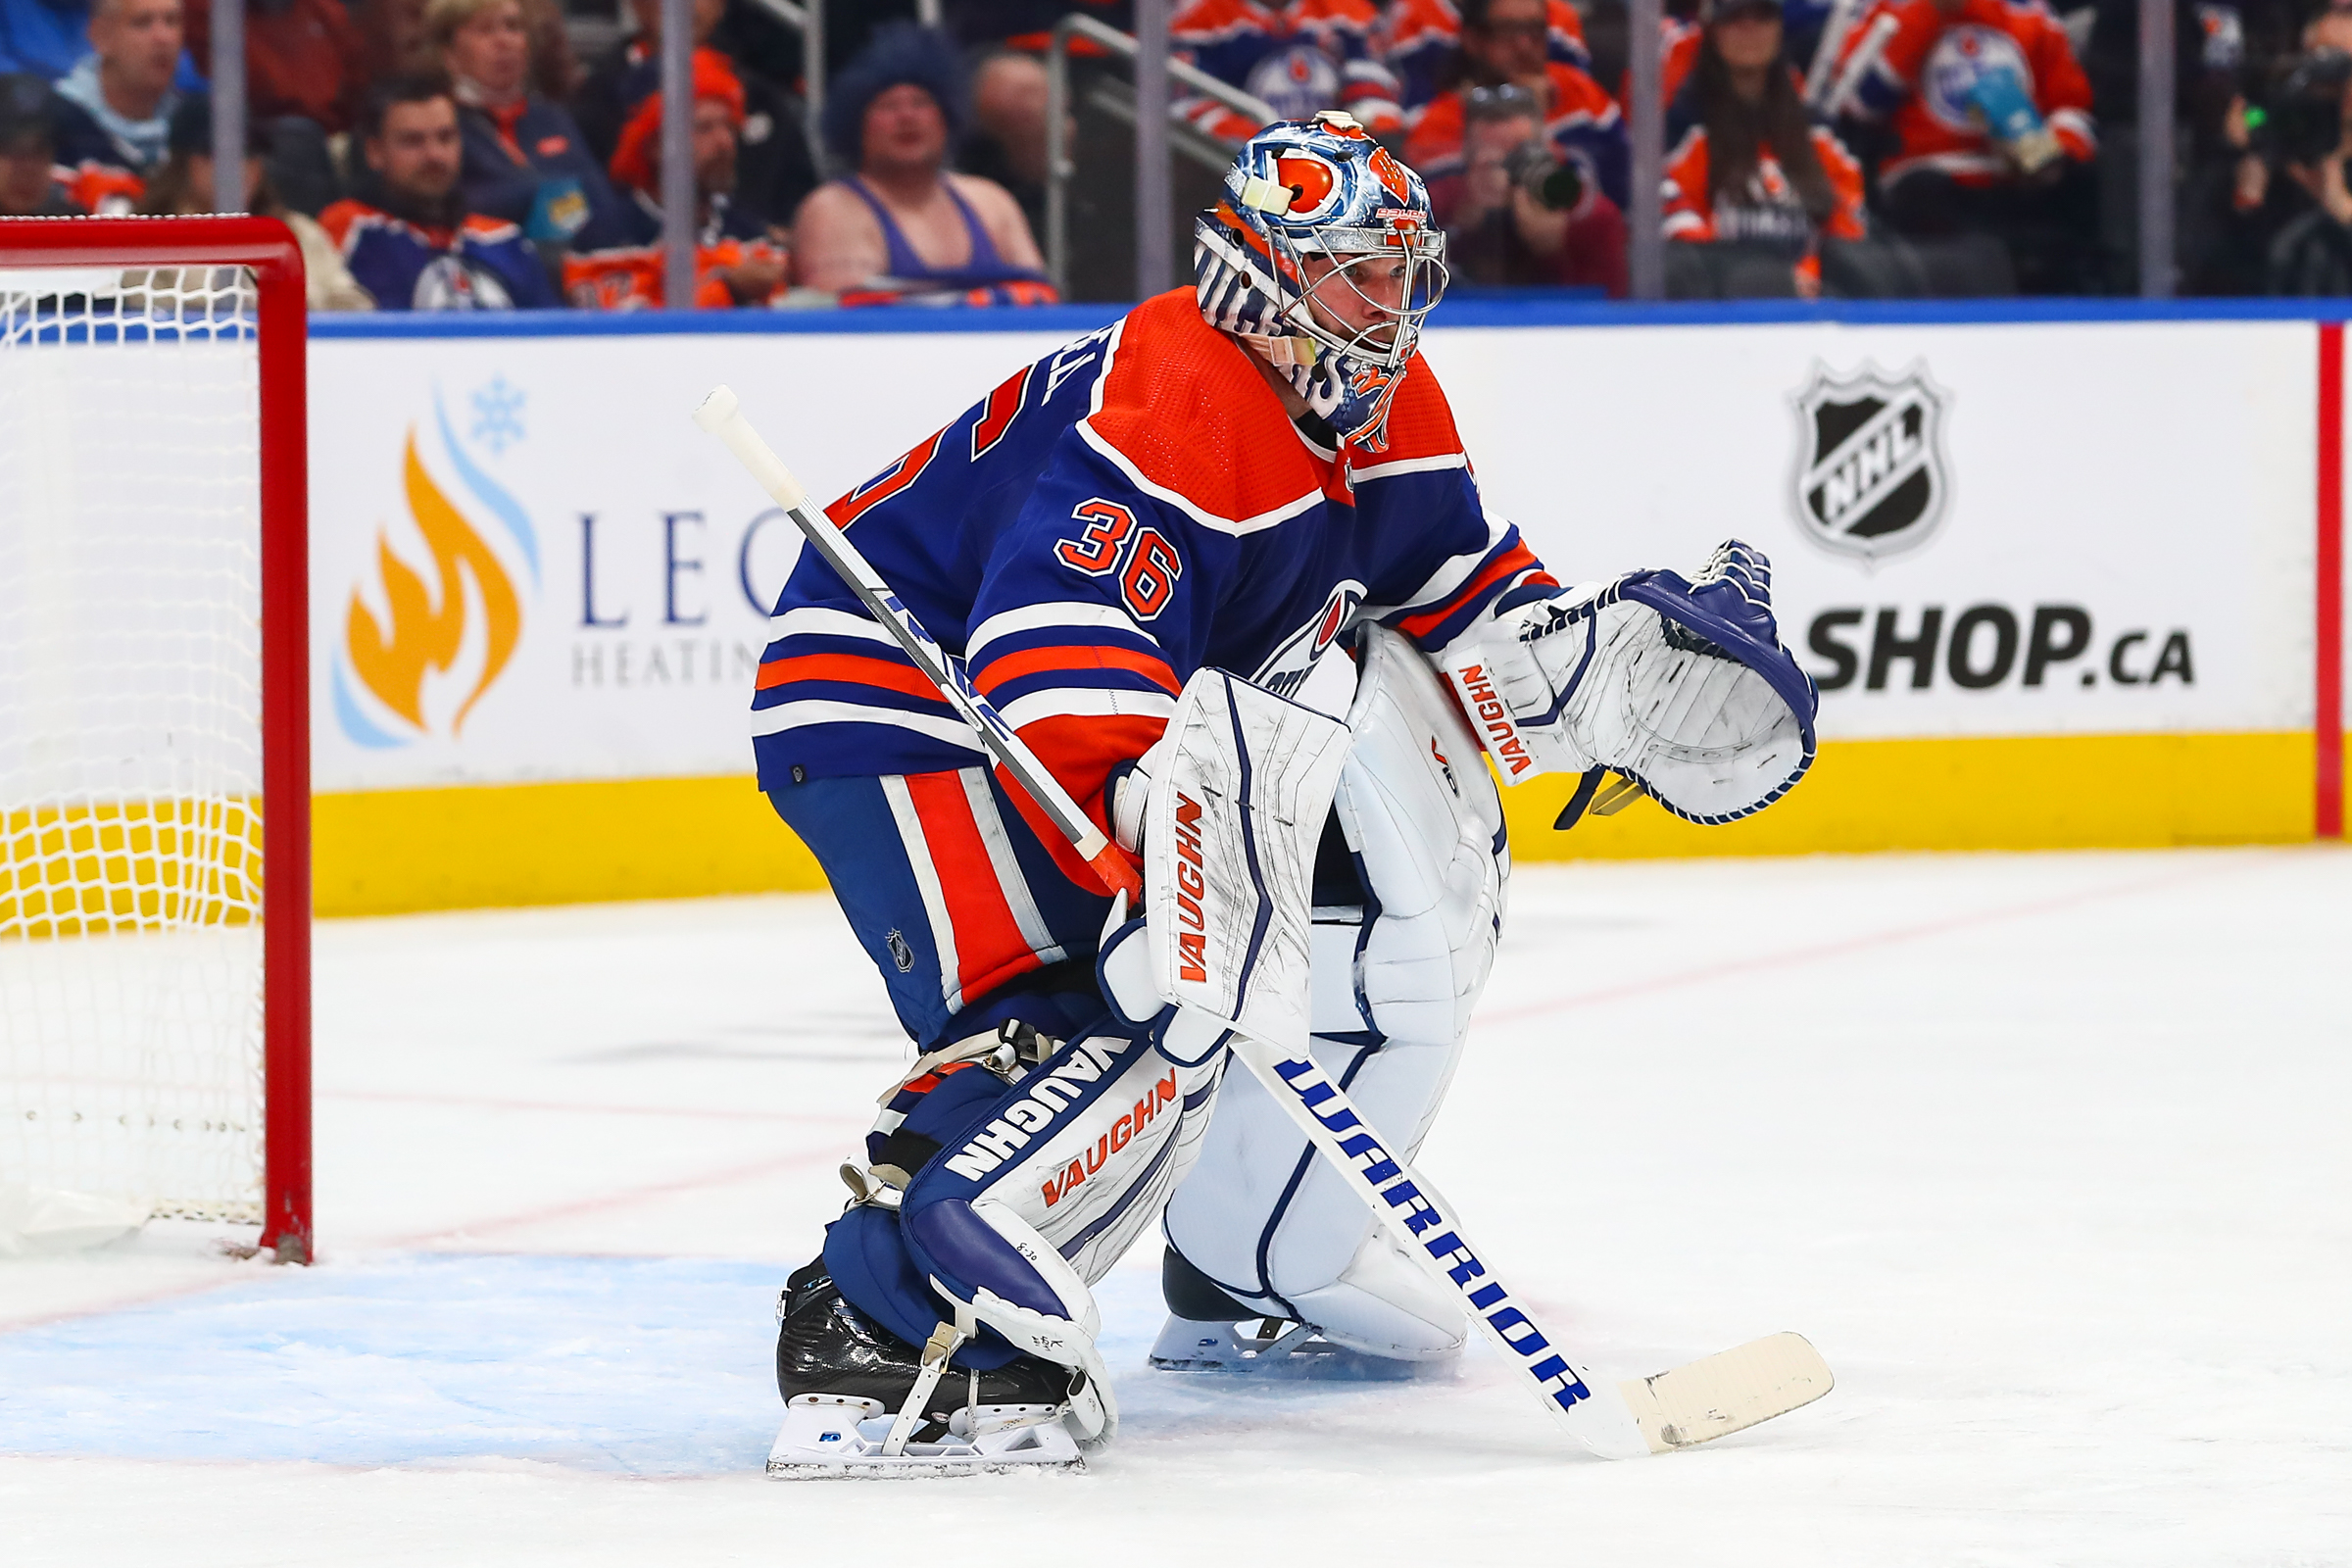 Goaltender Jack Campbell shines in Oilers’ 2-1 overtime win against Flames